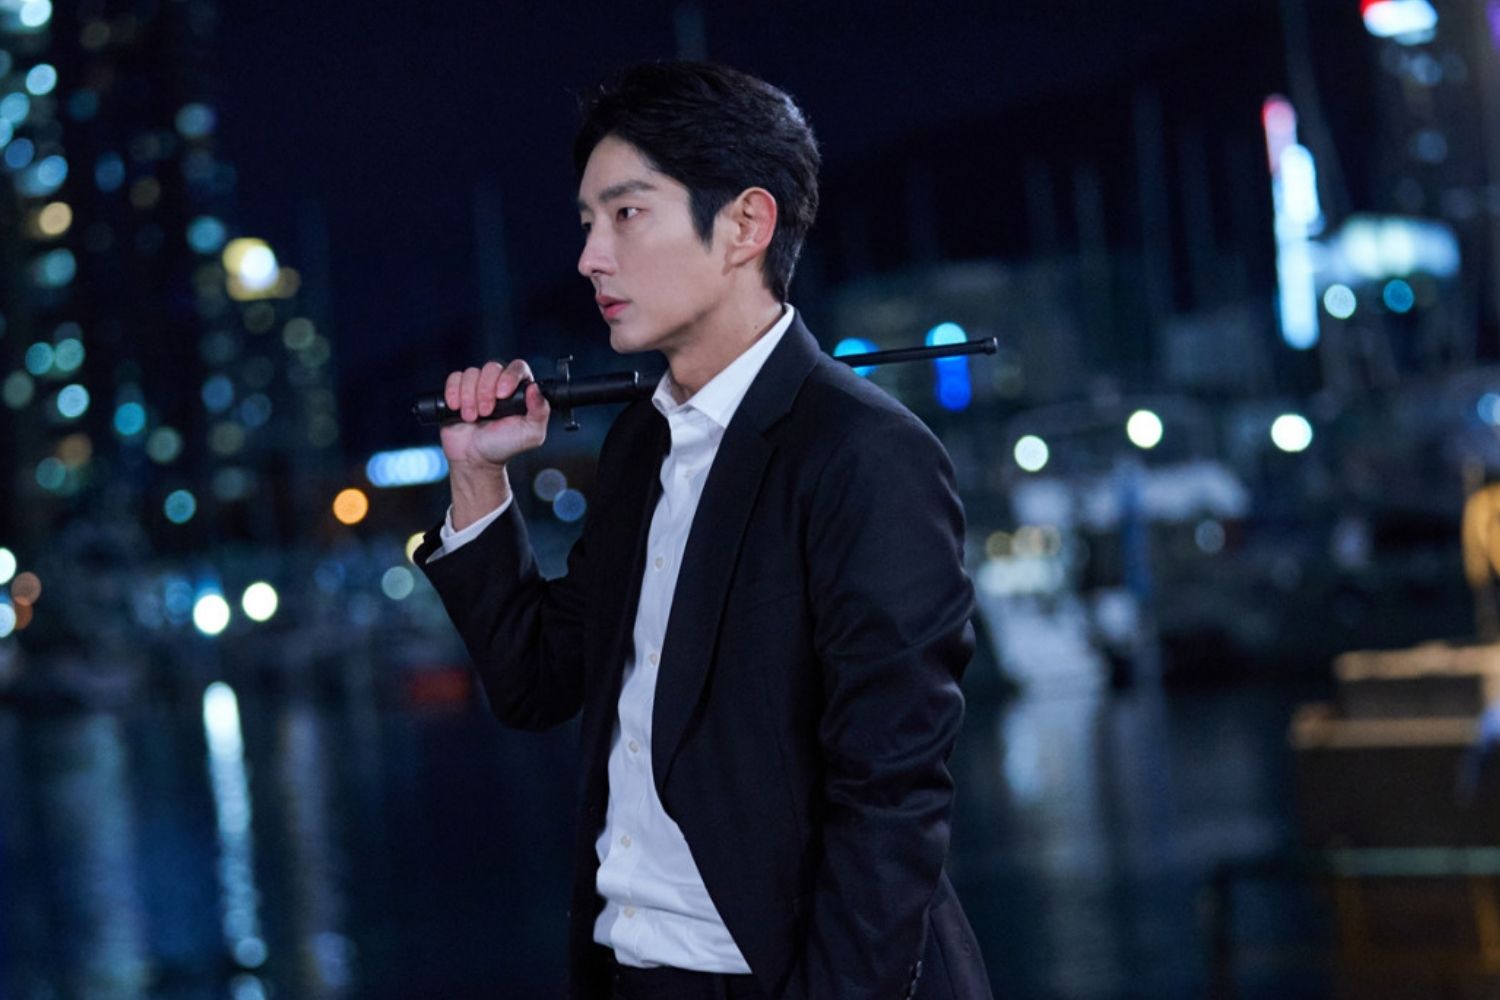 Featuring Lee Joon Gi as the hot-blooded prosecutor.